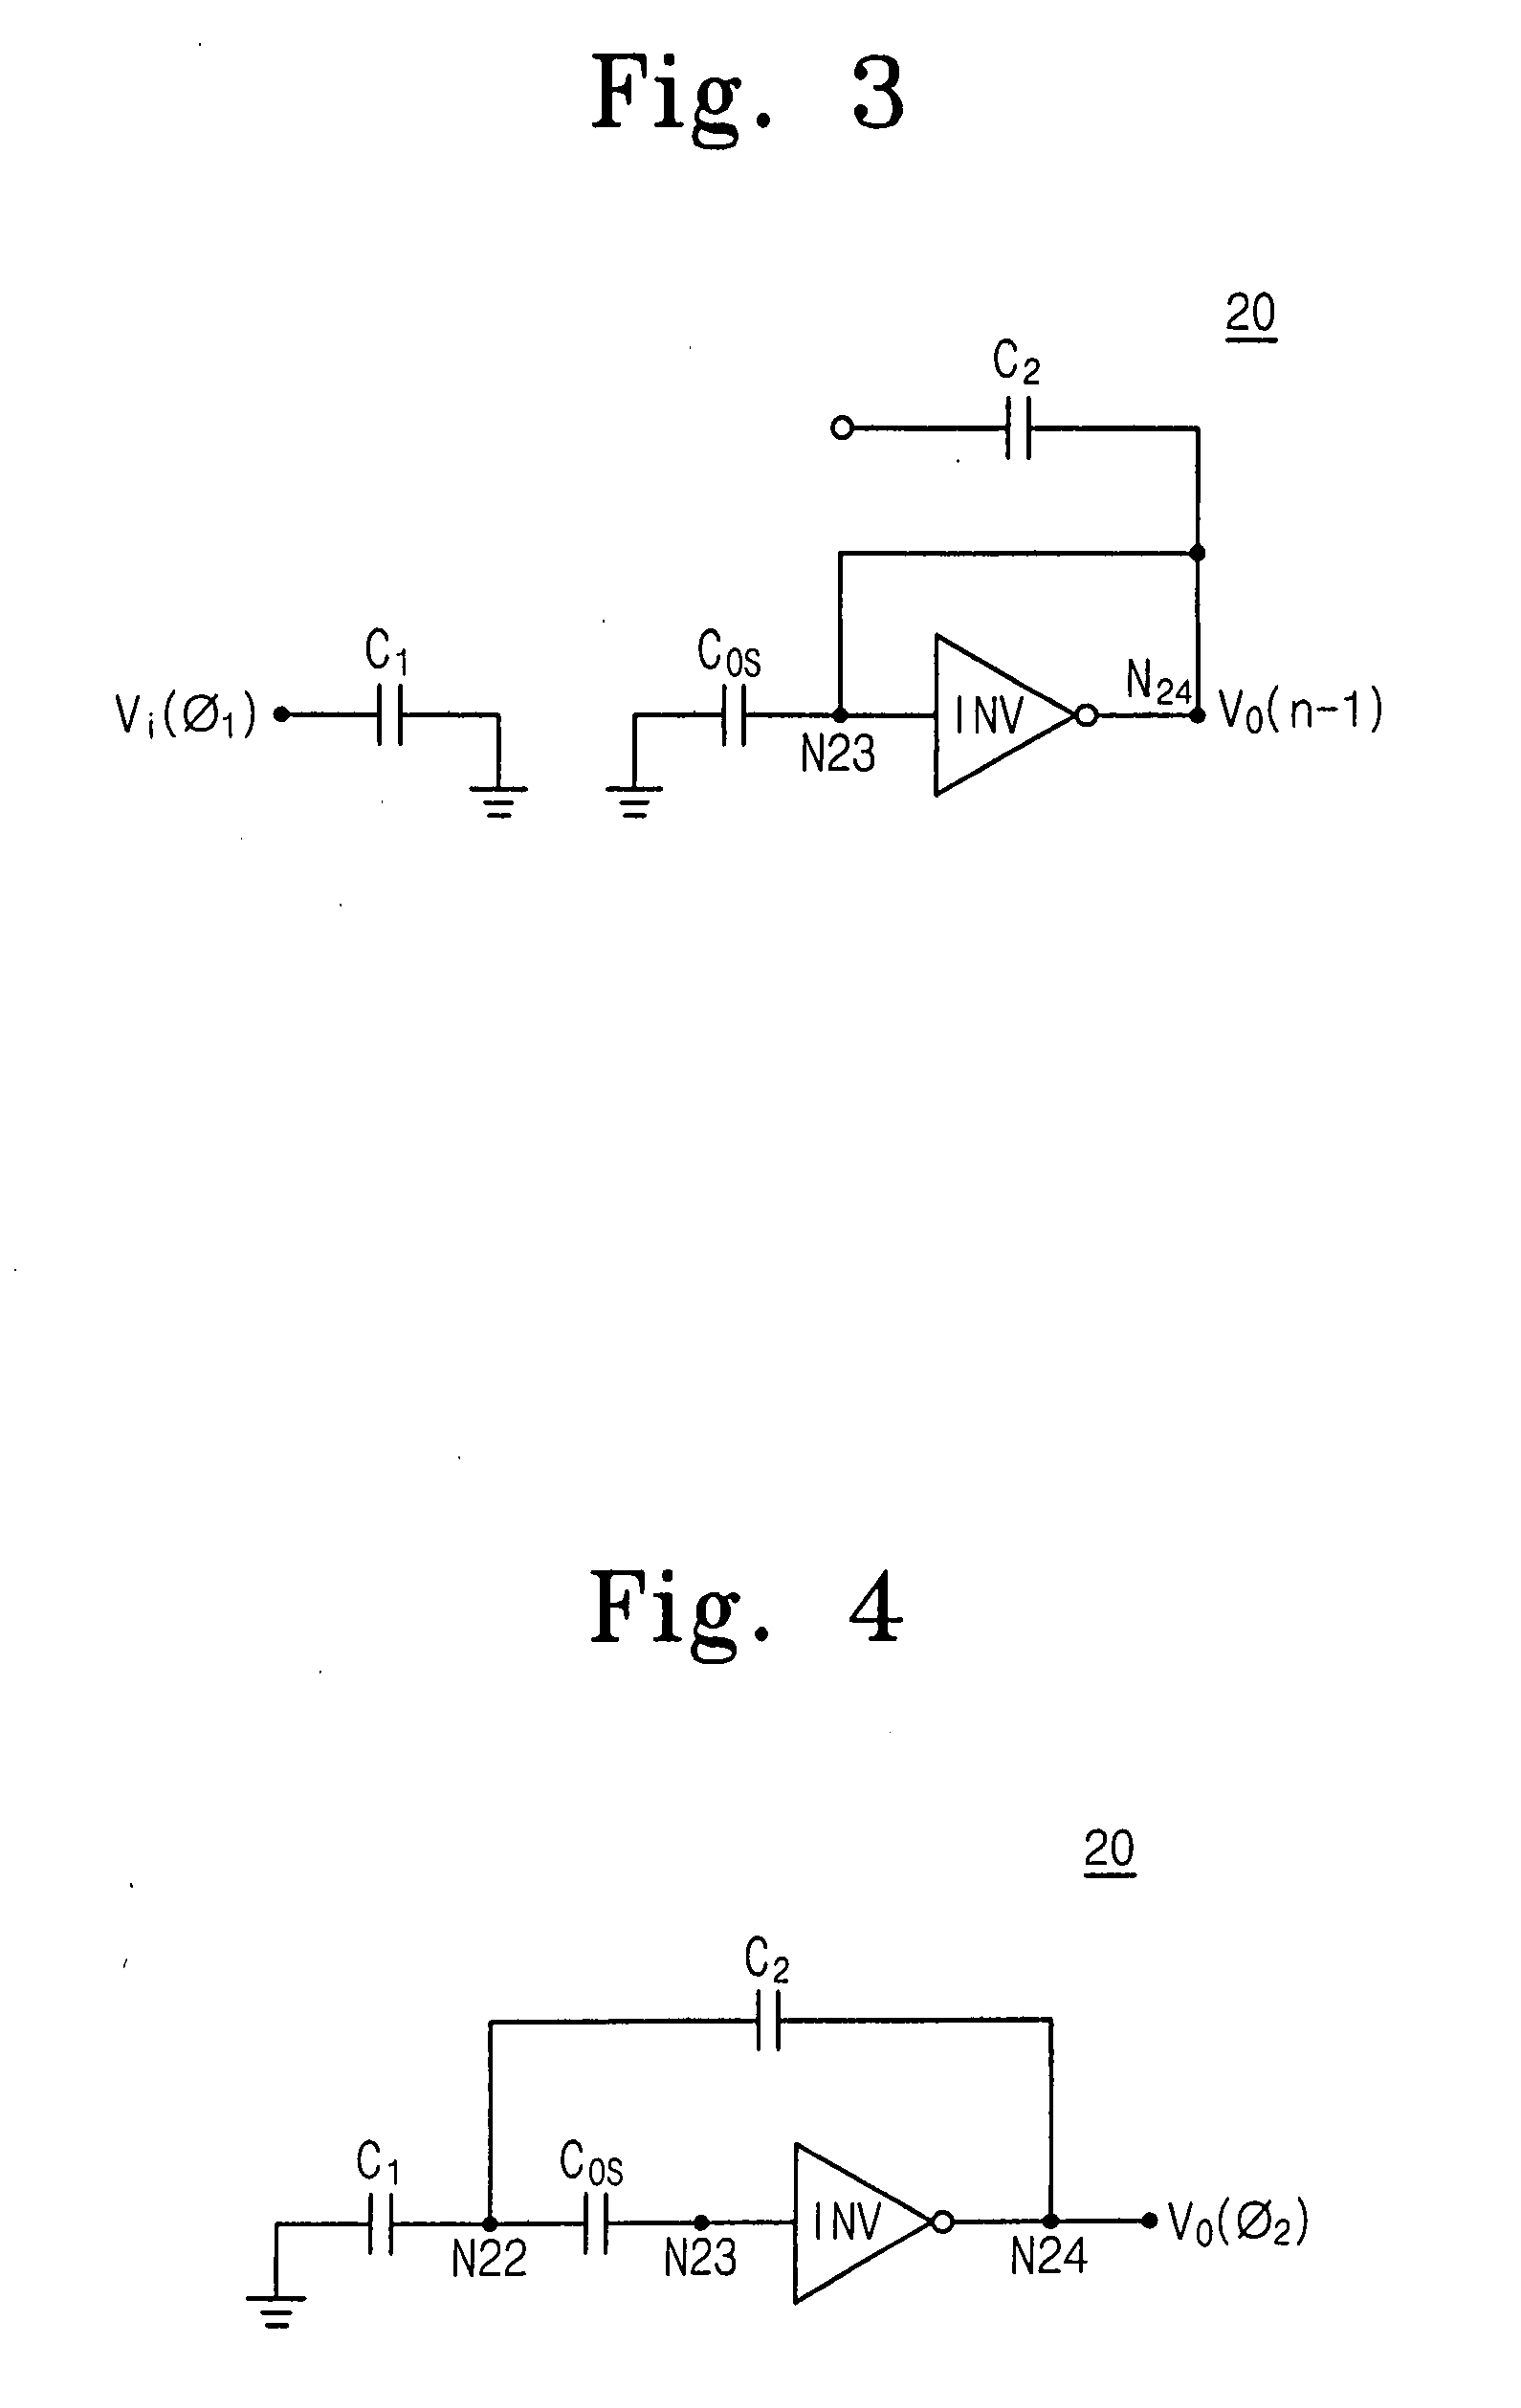 Switched capacitor circuit with inverting amplifier and offset unit